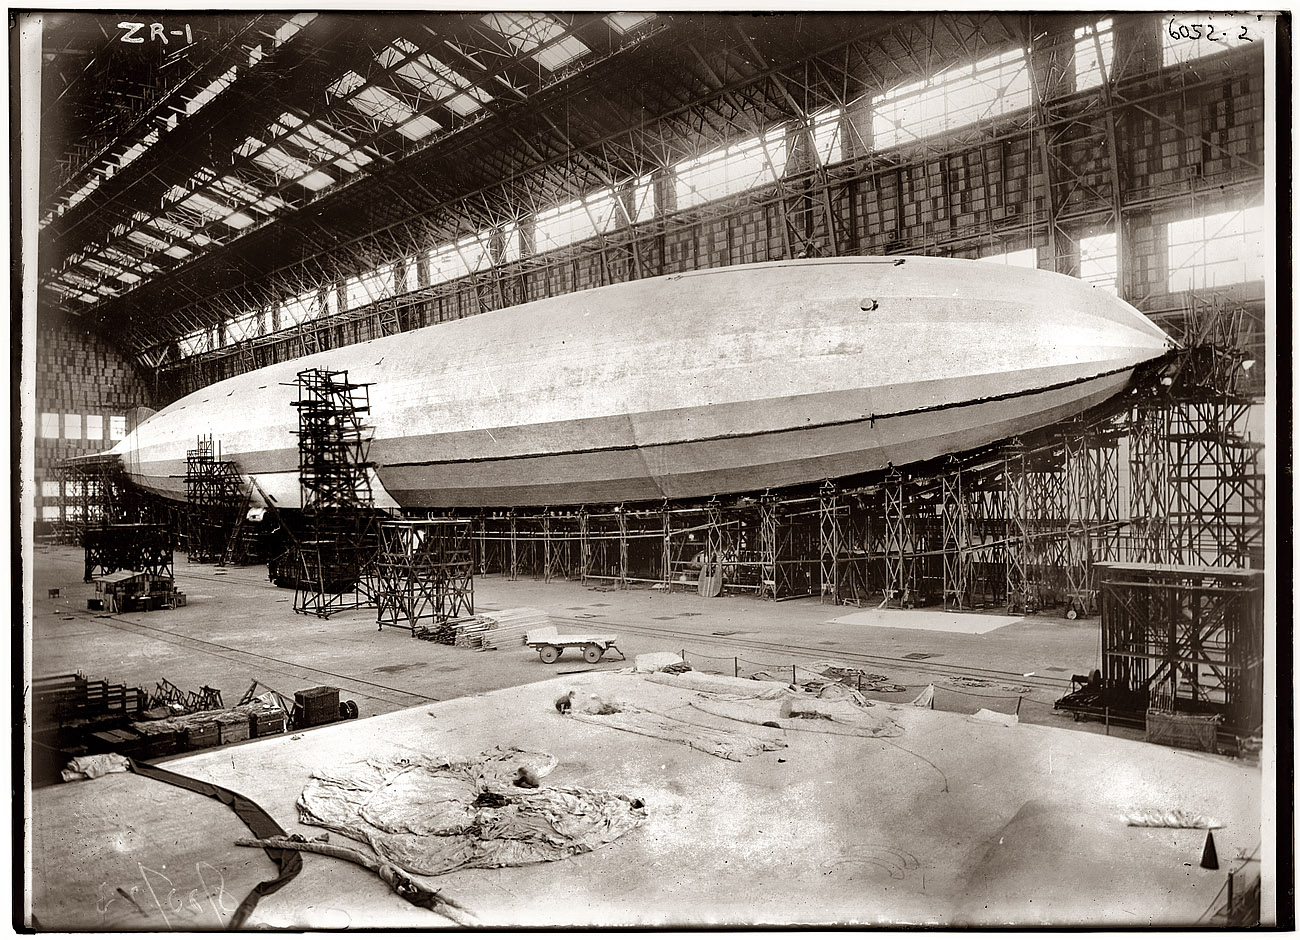 August 25, 1923. The Navy airship ZR-1 in its hangar at Lakehurst Naval Air Station, New Jersey. View full size. George Grantham Bain Collection.